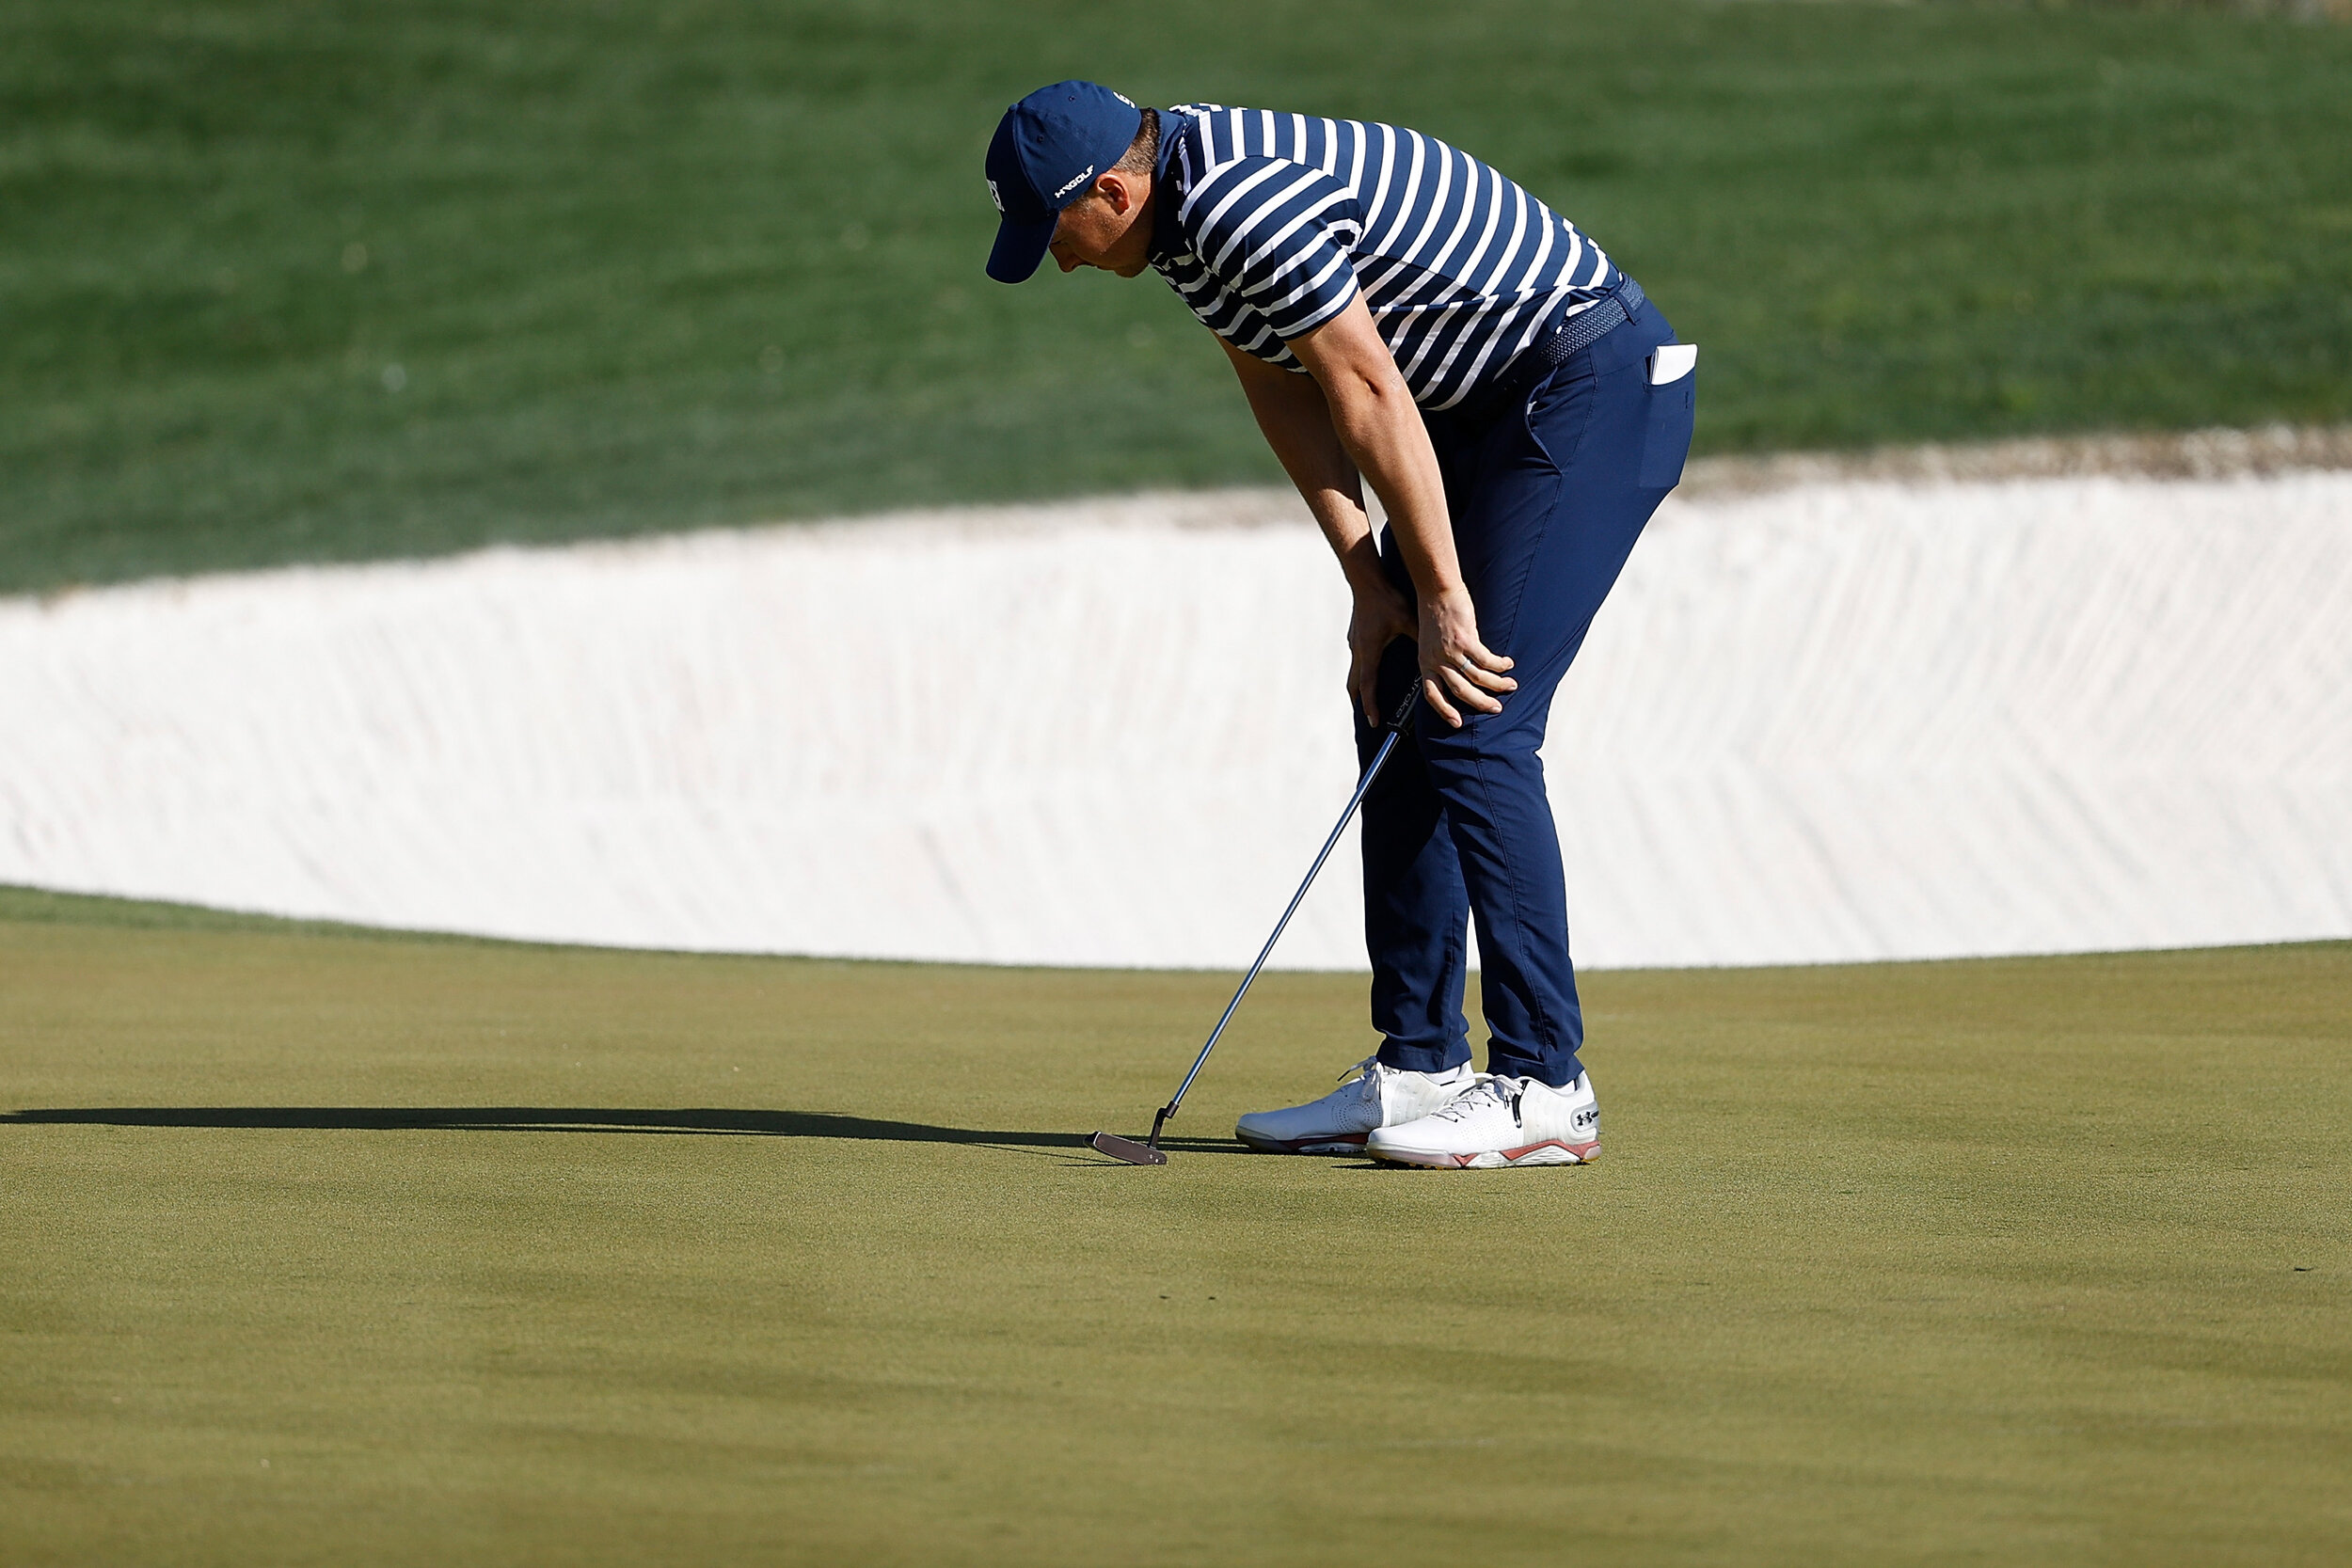  SCOTTSDALE, ARIZONA - FEBRUARY 07: Jordan Spieth of the United States reacts to a putt on the 12th green during the final round of the Waste Management Phoenix Open at TPC Scottsdale on February 07, 2021 in Scottsdale, Arizona. (Photo by Christian P